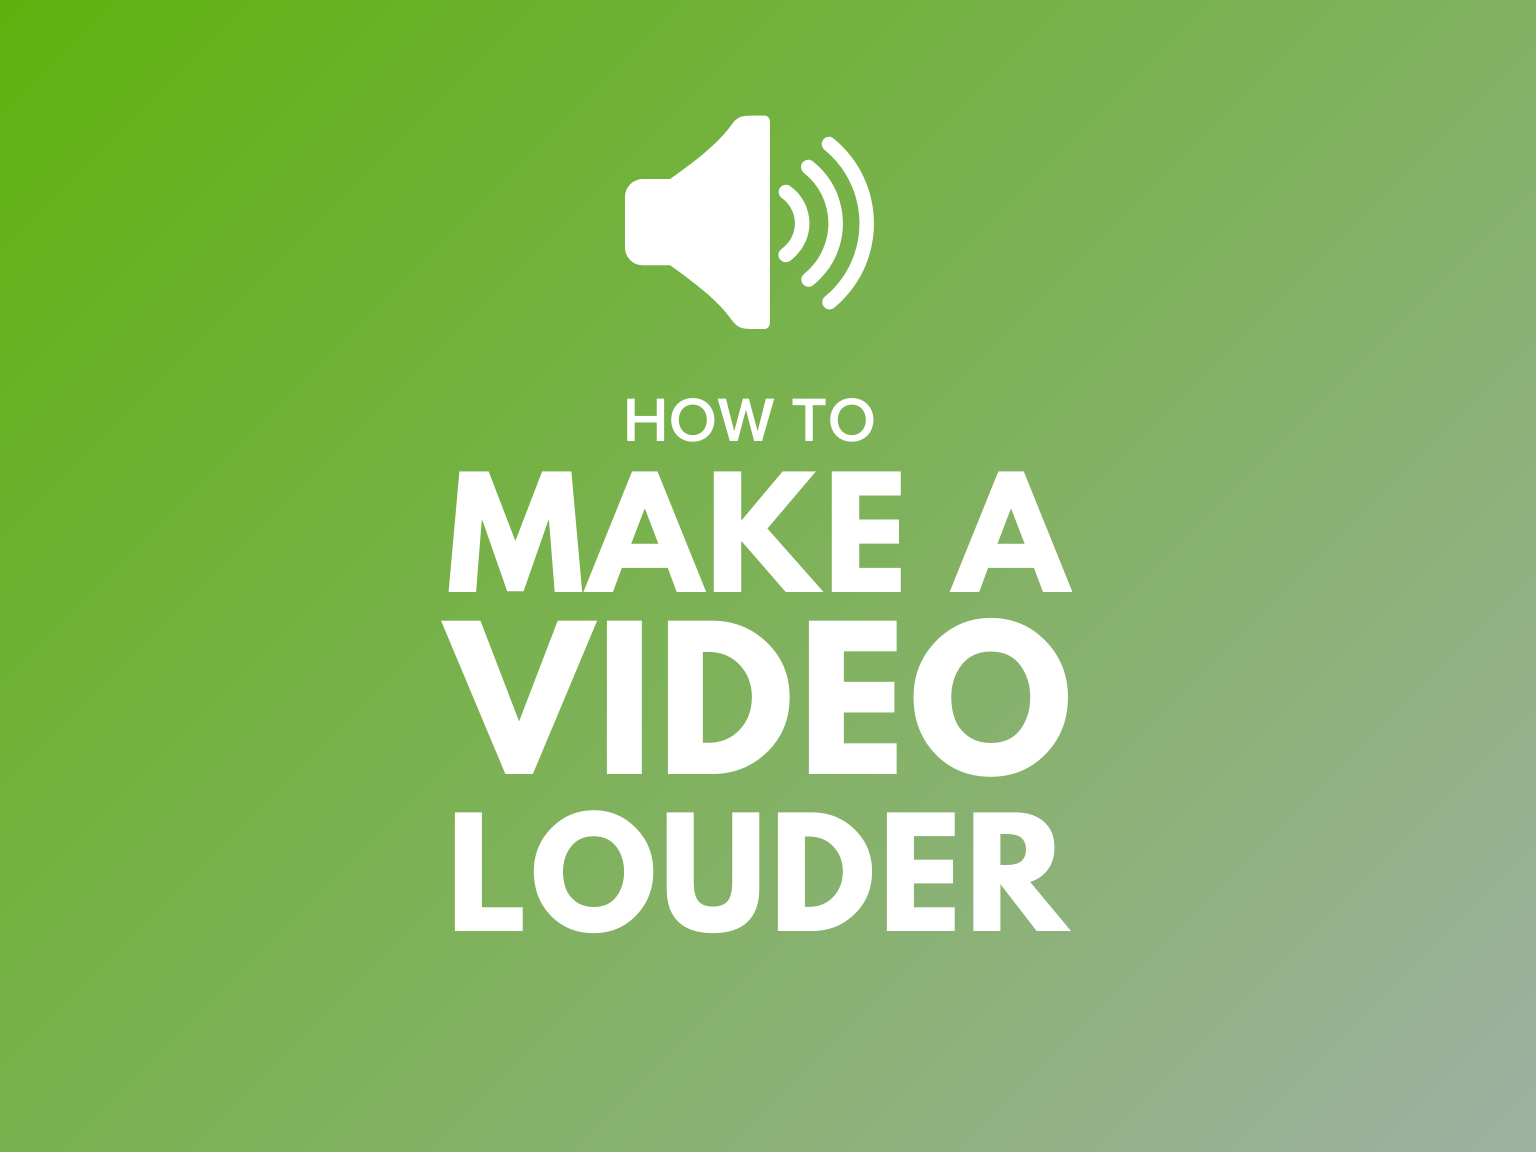 How to Make a Video Louder